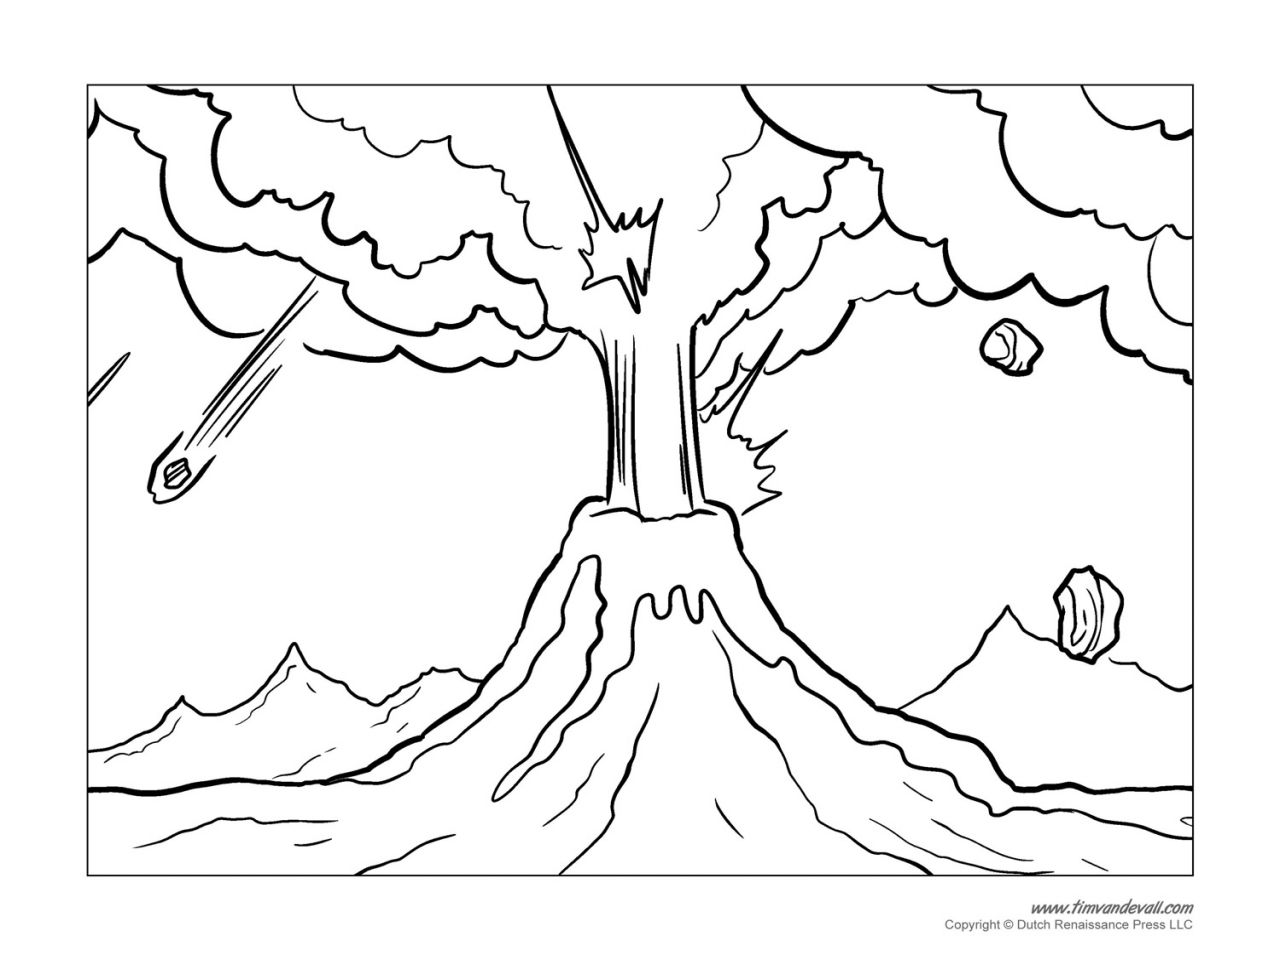 geology-coloring-pages-at-getcolorings-free-printable-colorings